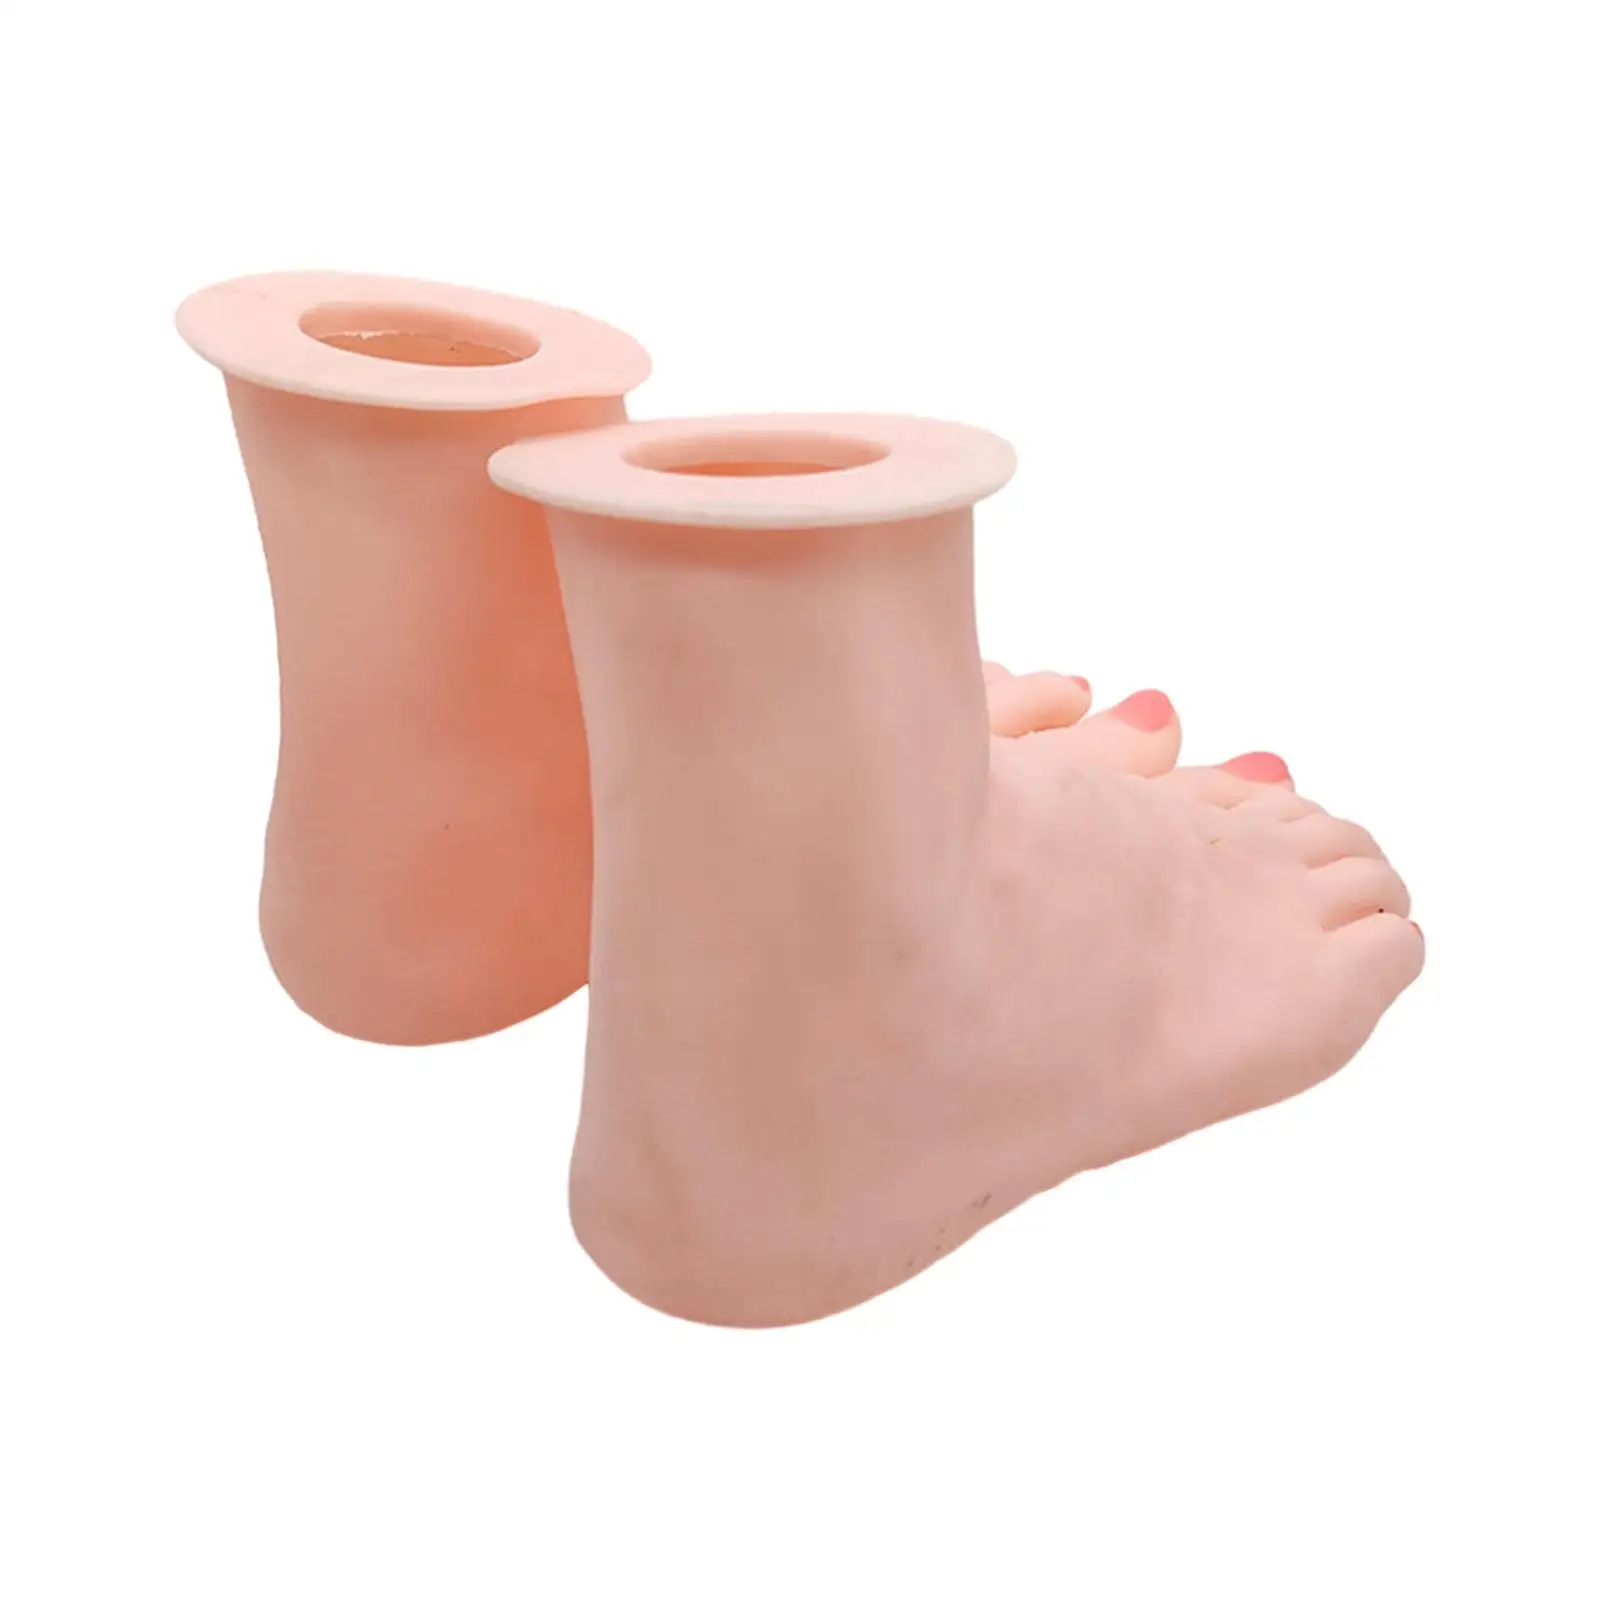 Women Mannequin Feet Display Silicone Foot Model Ankle Bracelet Shoes Sock Display for Short Stocking Home Chains Jewelry Retail